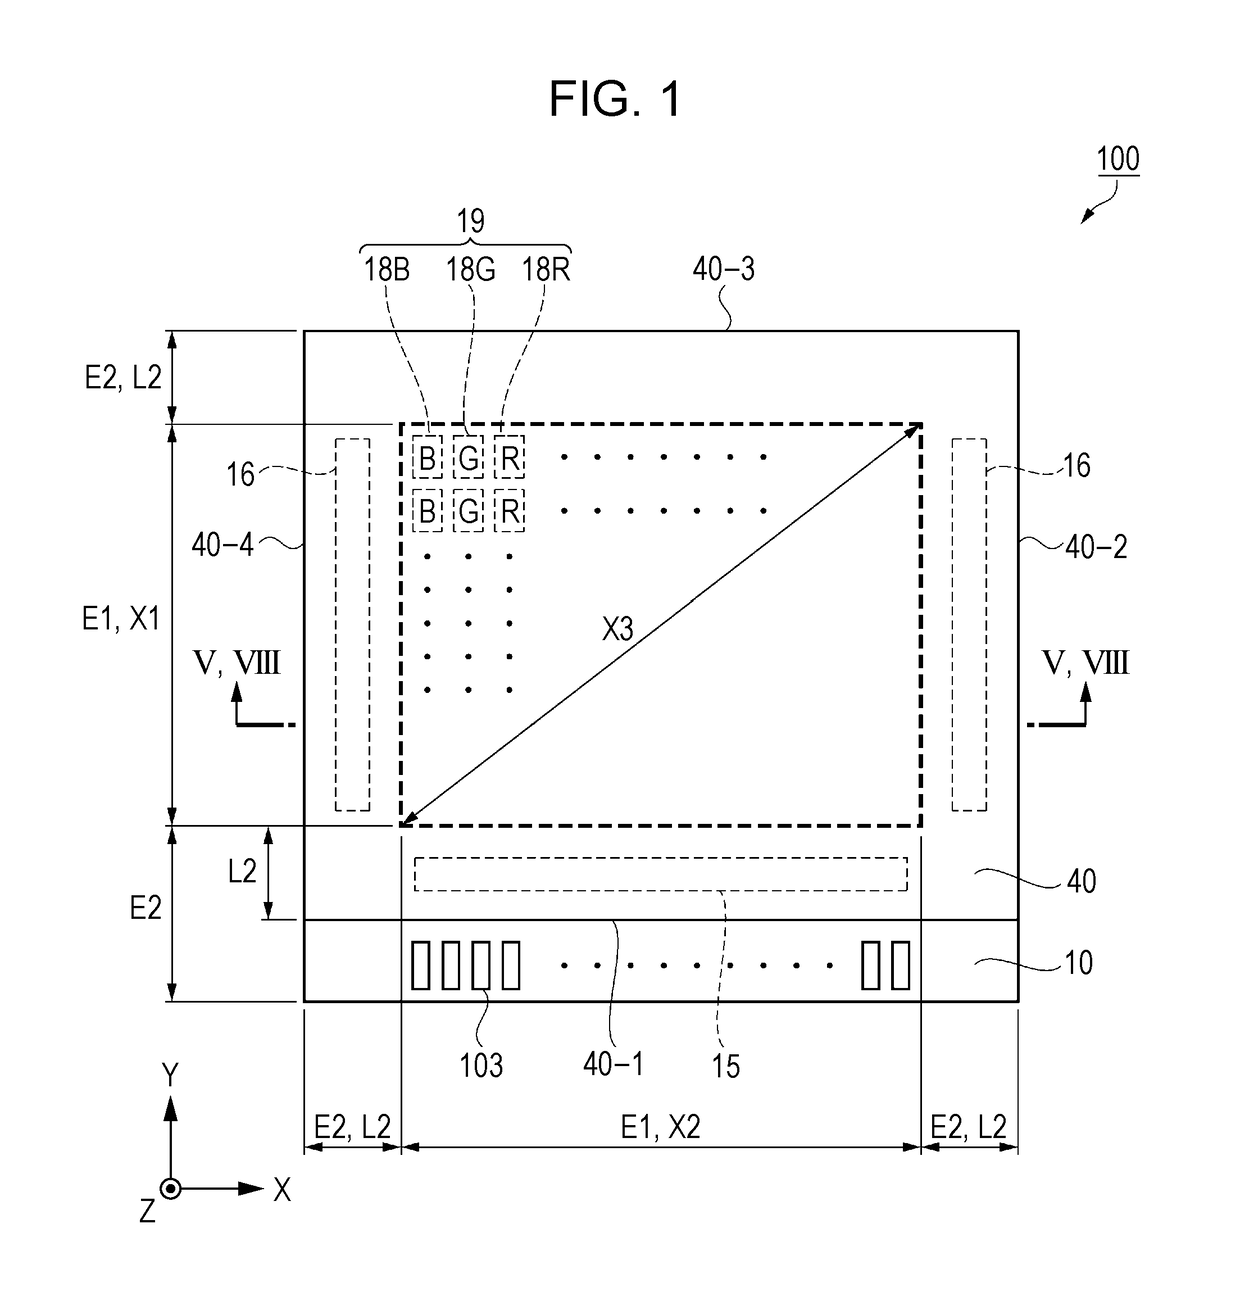 Display device having a substrate with a polygonal display area and an electronic apparatus